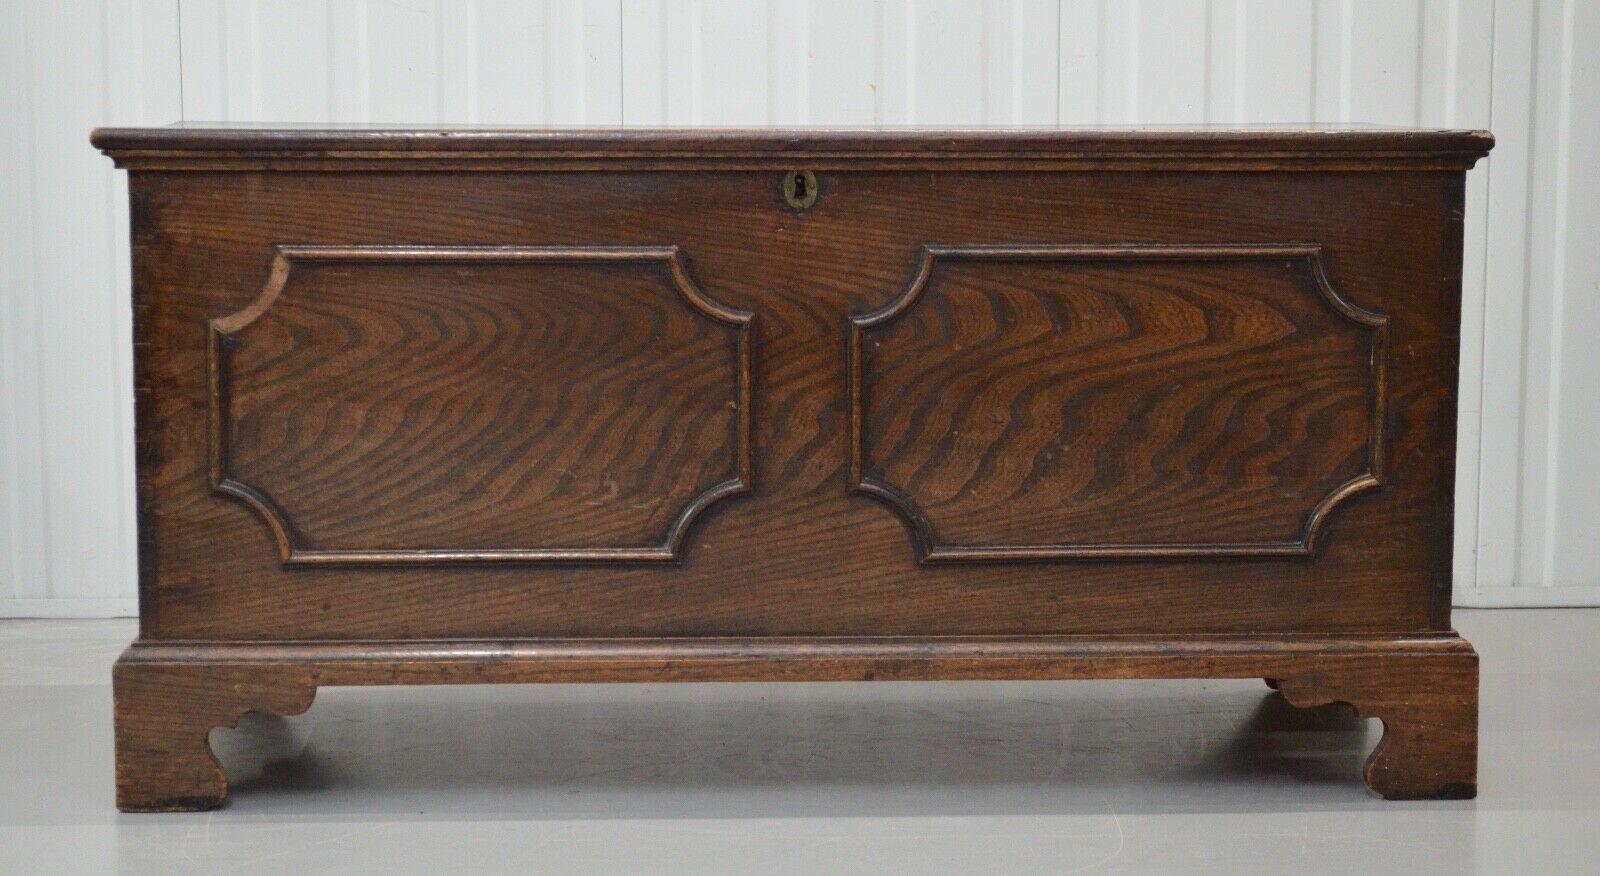 We are delighted to offer for sale this early 19th century elm blanket box. This antique country chest, blanket box has a nice patina, the condition is very good can be used as coffee table.

Dimensions

Height : 59cm
Width : 120cm
Depth: